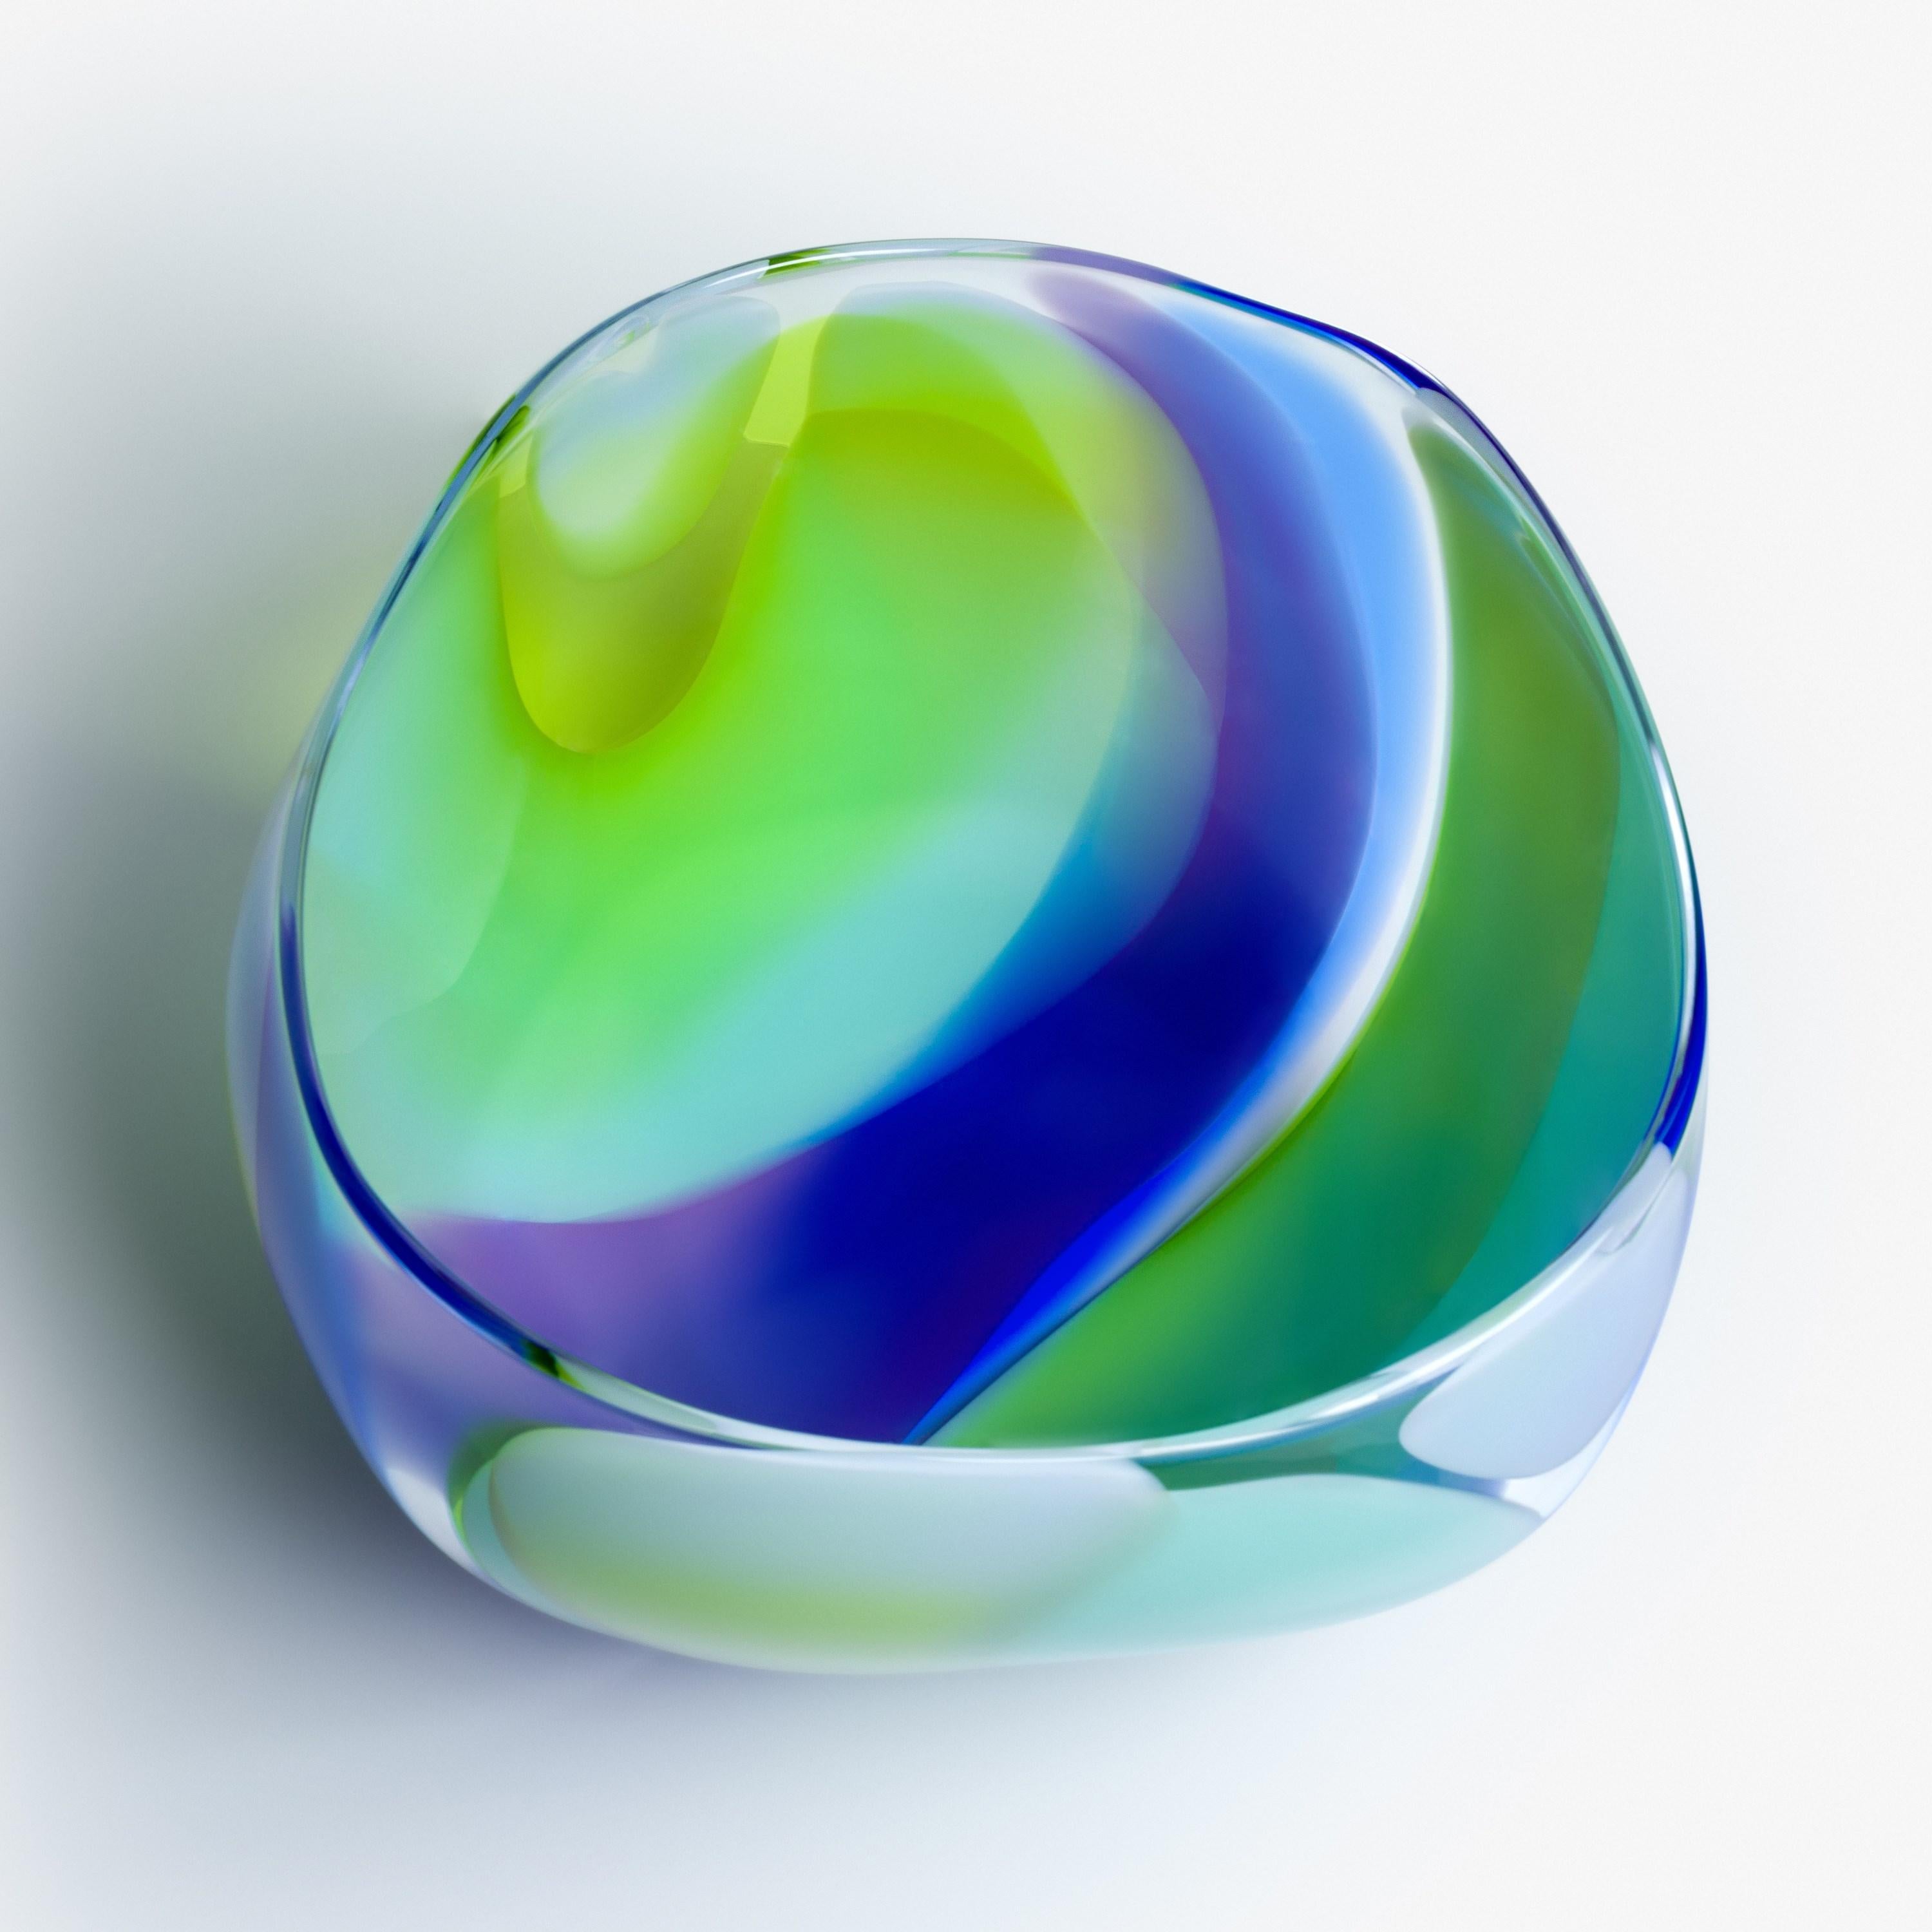 Hand-Crafted  Waves No 654, a blue, lime & aqua abstract handblown glass bowl by Neil Wilkin